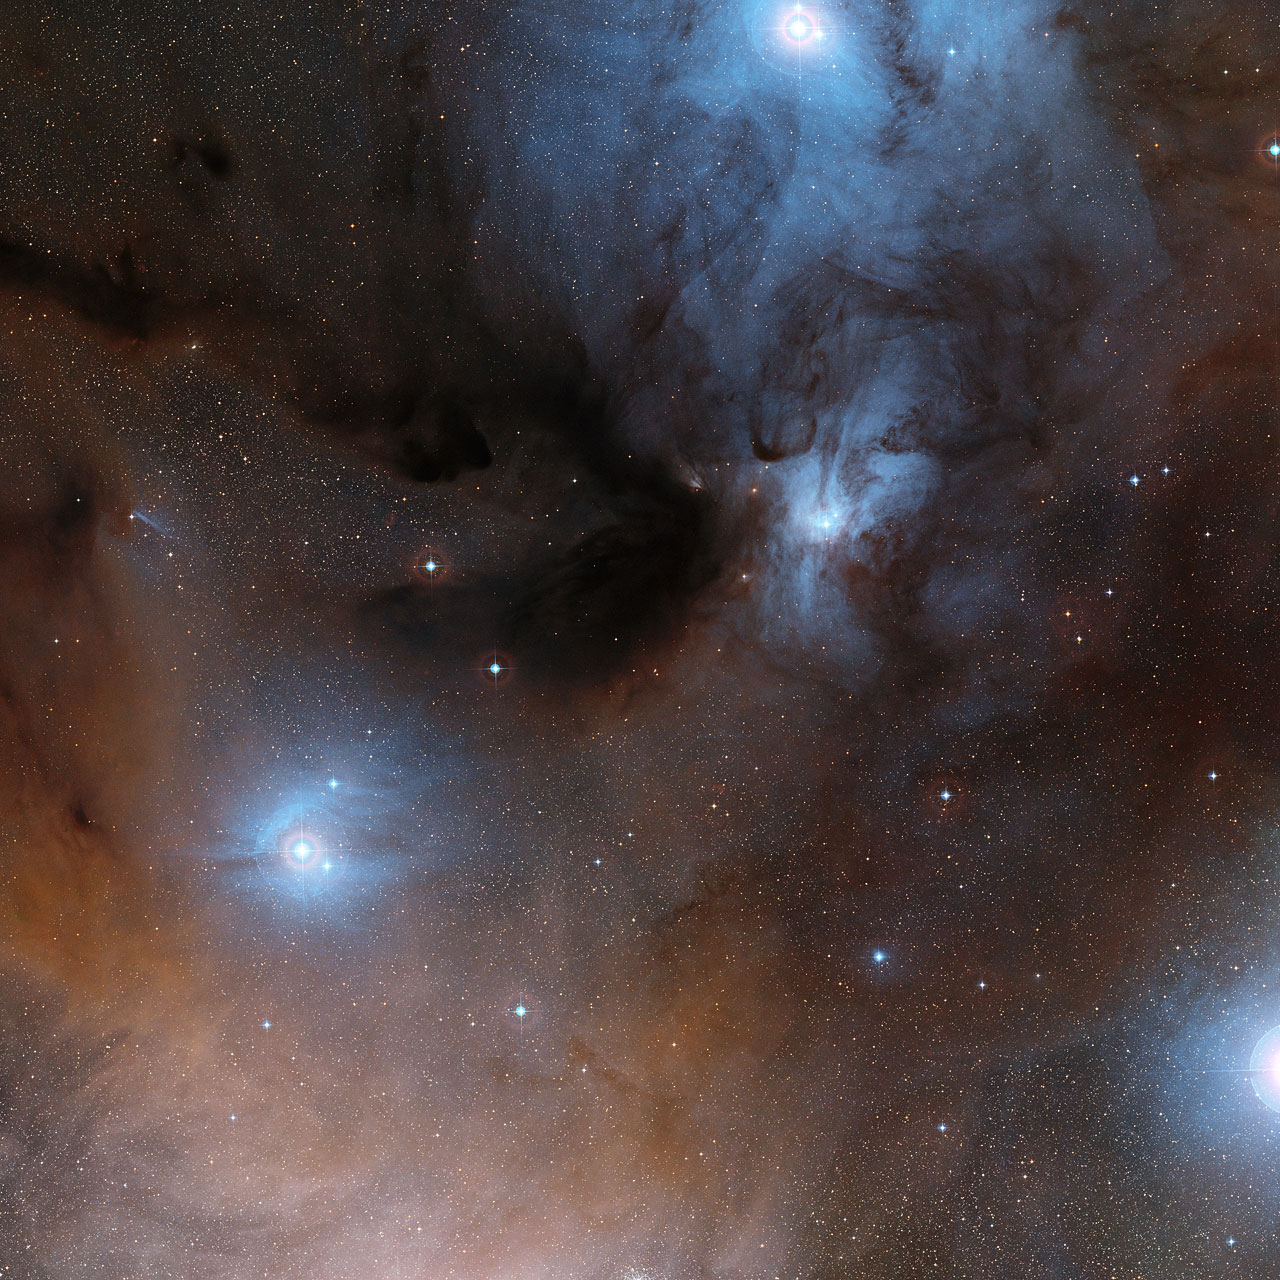 The Rho Ophiuchi star formation region in the constellation of O